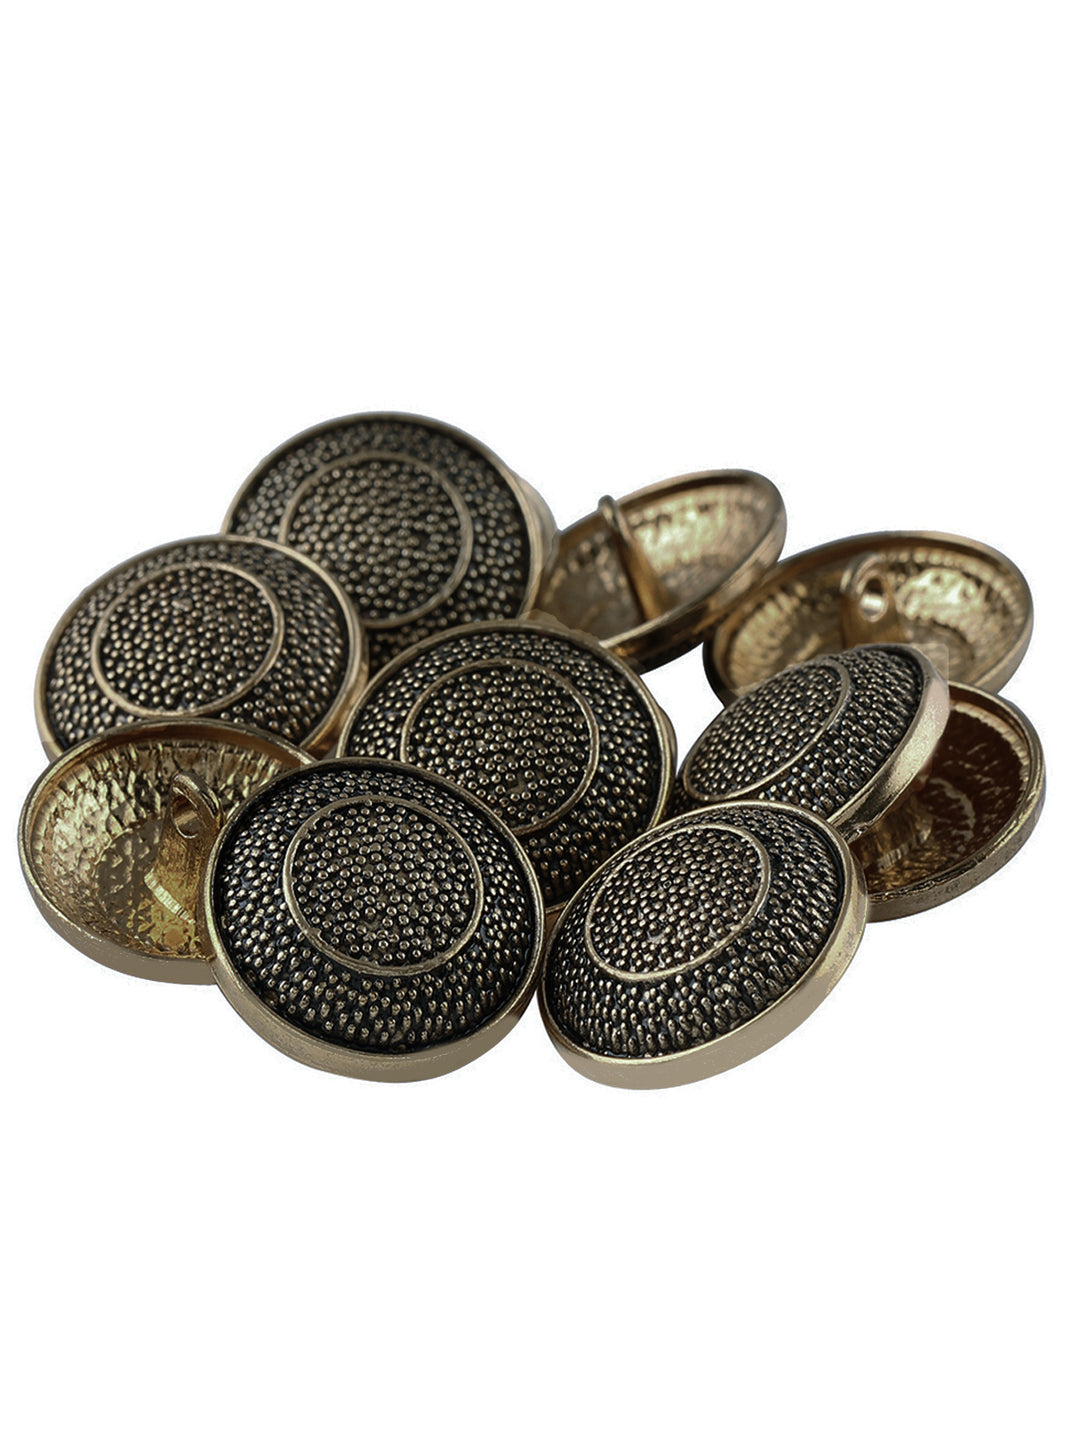 Chacana Metal Buttons 20mm Antique Brass Concho Button, Qty 4 to 8 Bronze  Concha Native American Style 3/4” Sewing Clothing Jacket Sweater